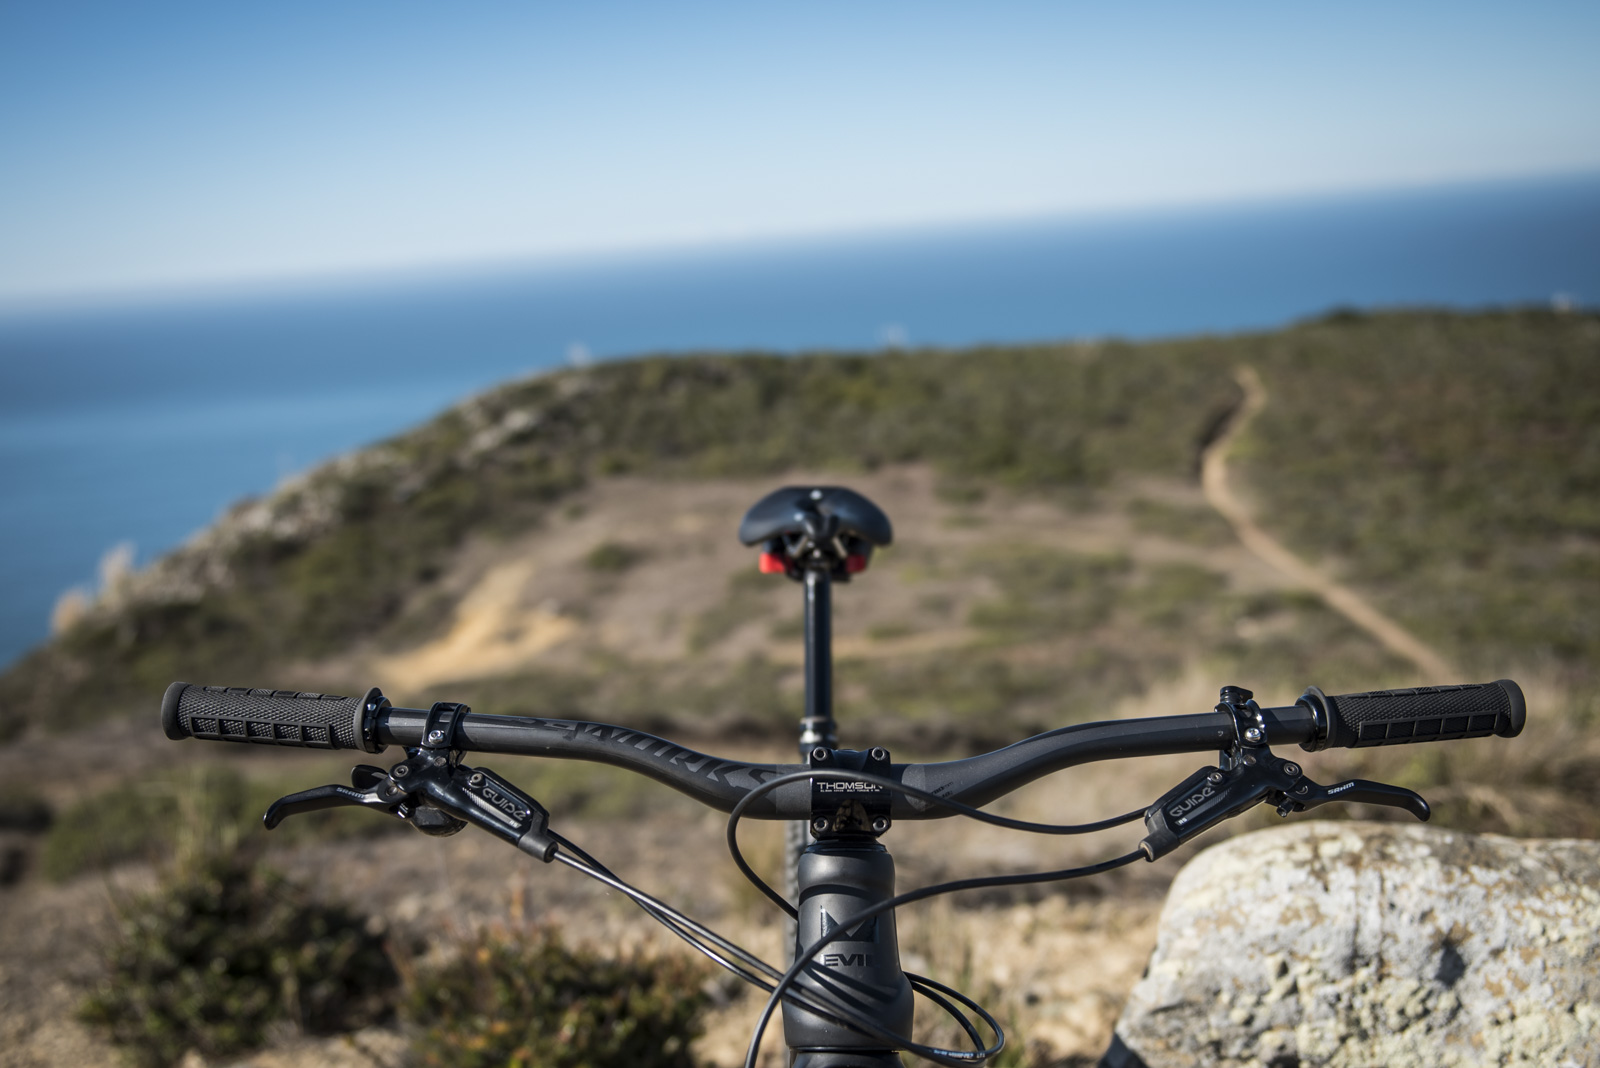 Tested] Specialized S-Works DH Carbon Handlebar | MTB-MAG.COM